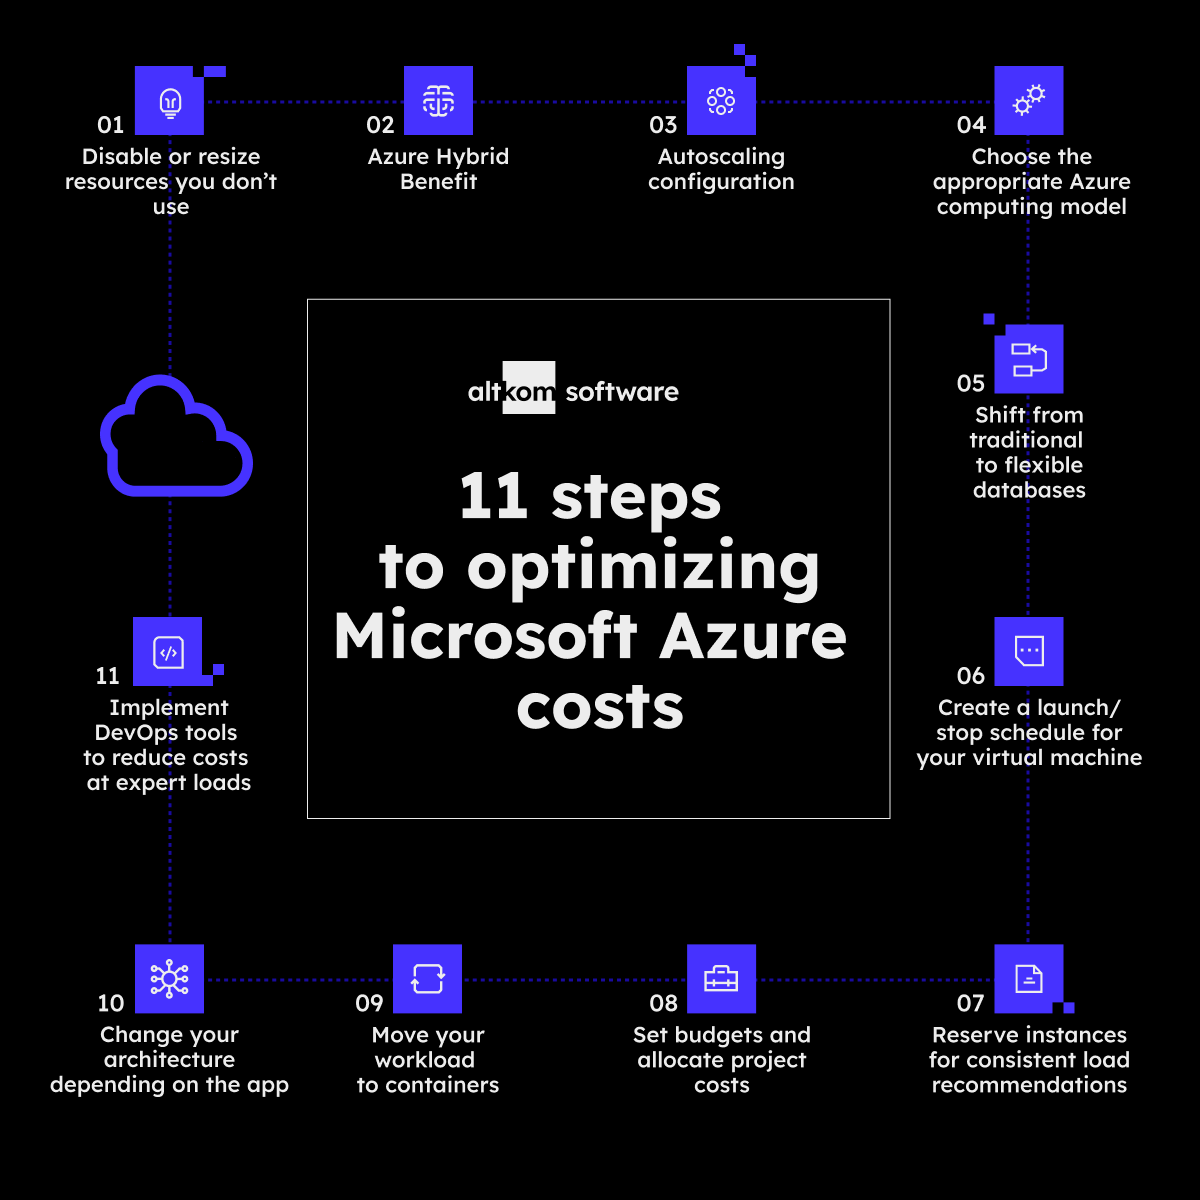 Infographic showing 11 steps to ptimizing Microsoft Azure costs